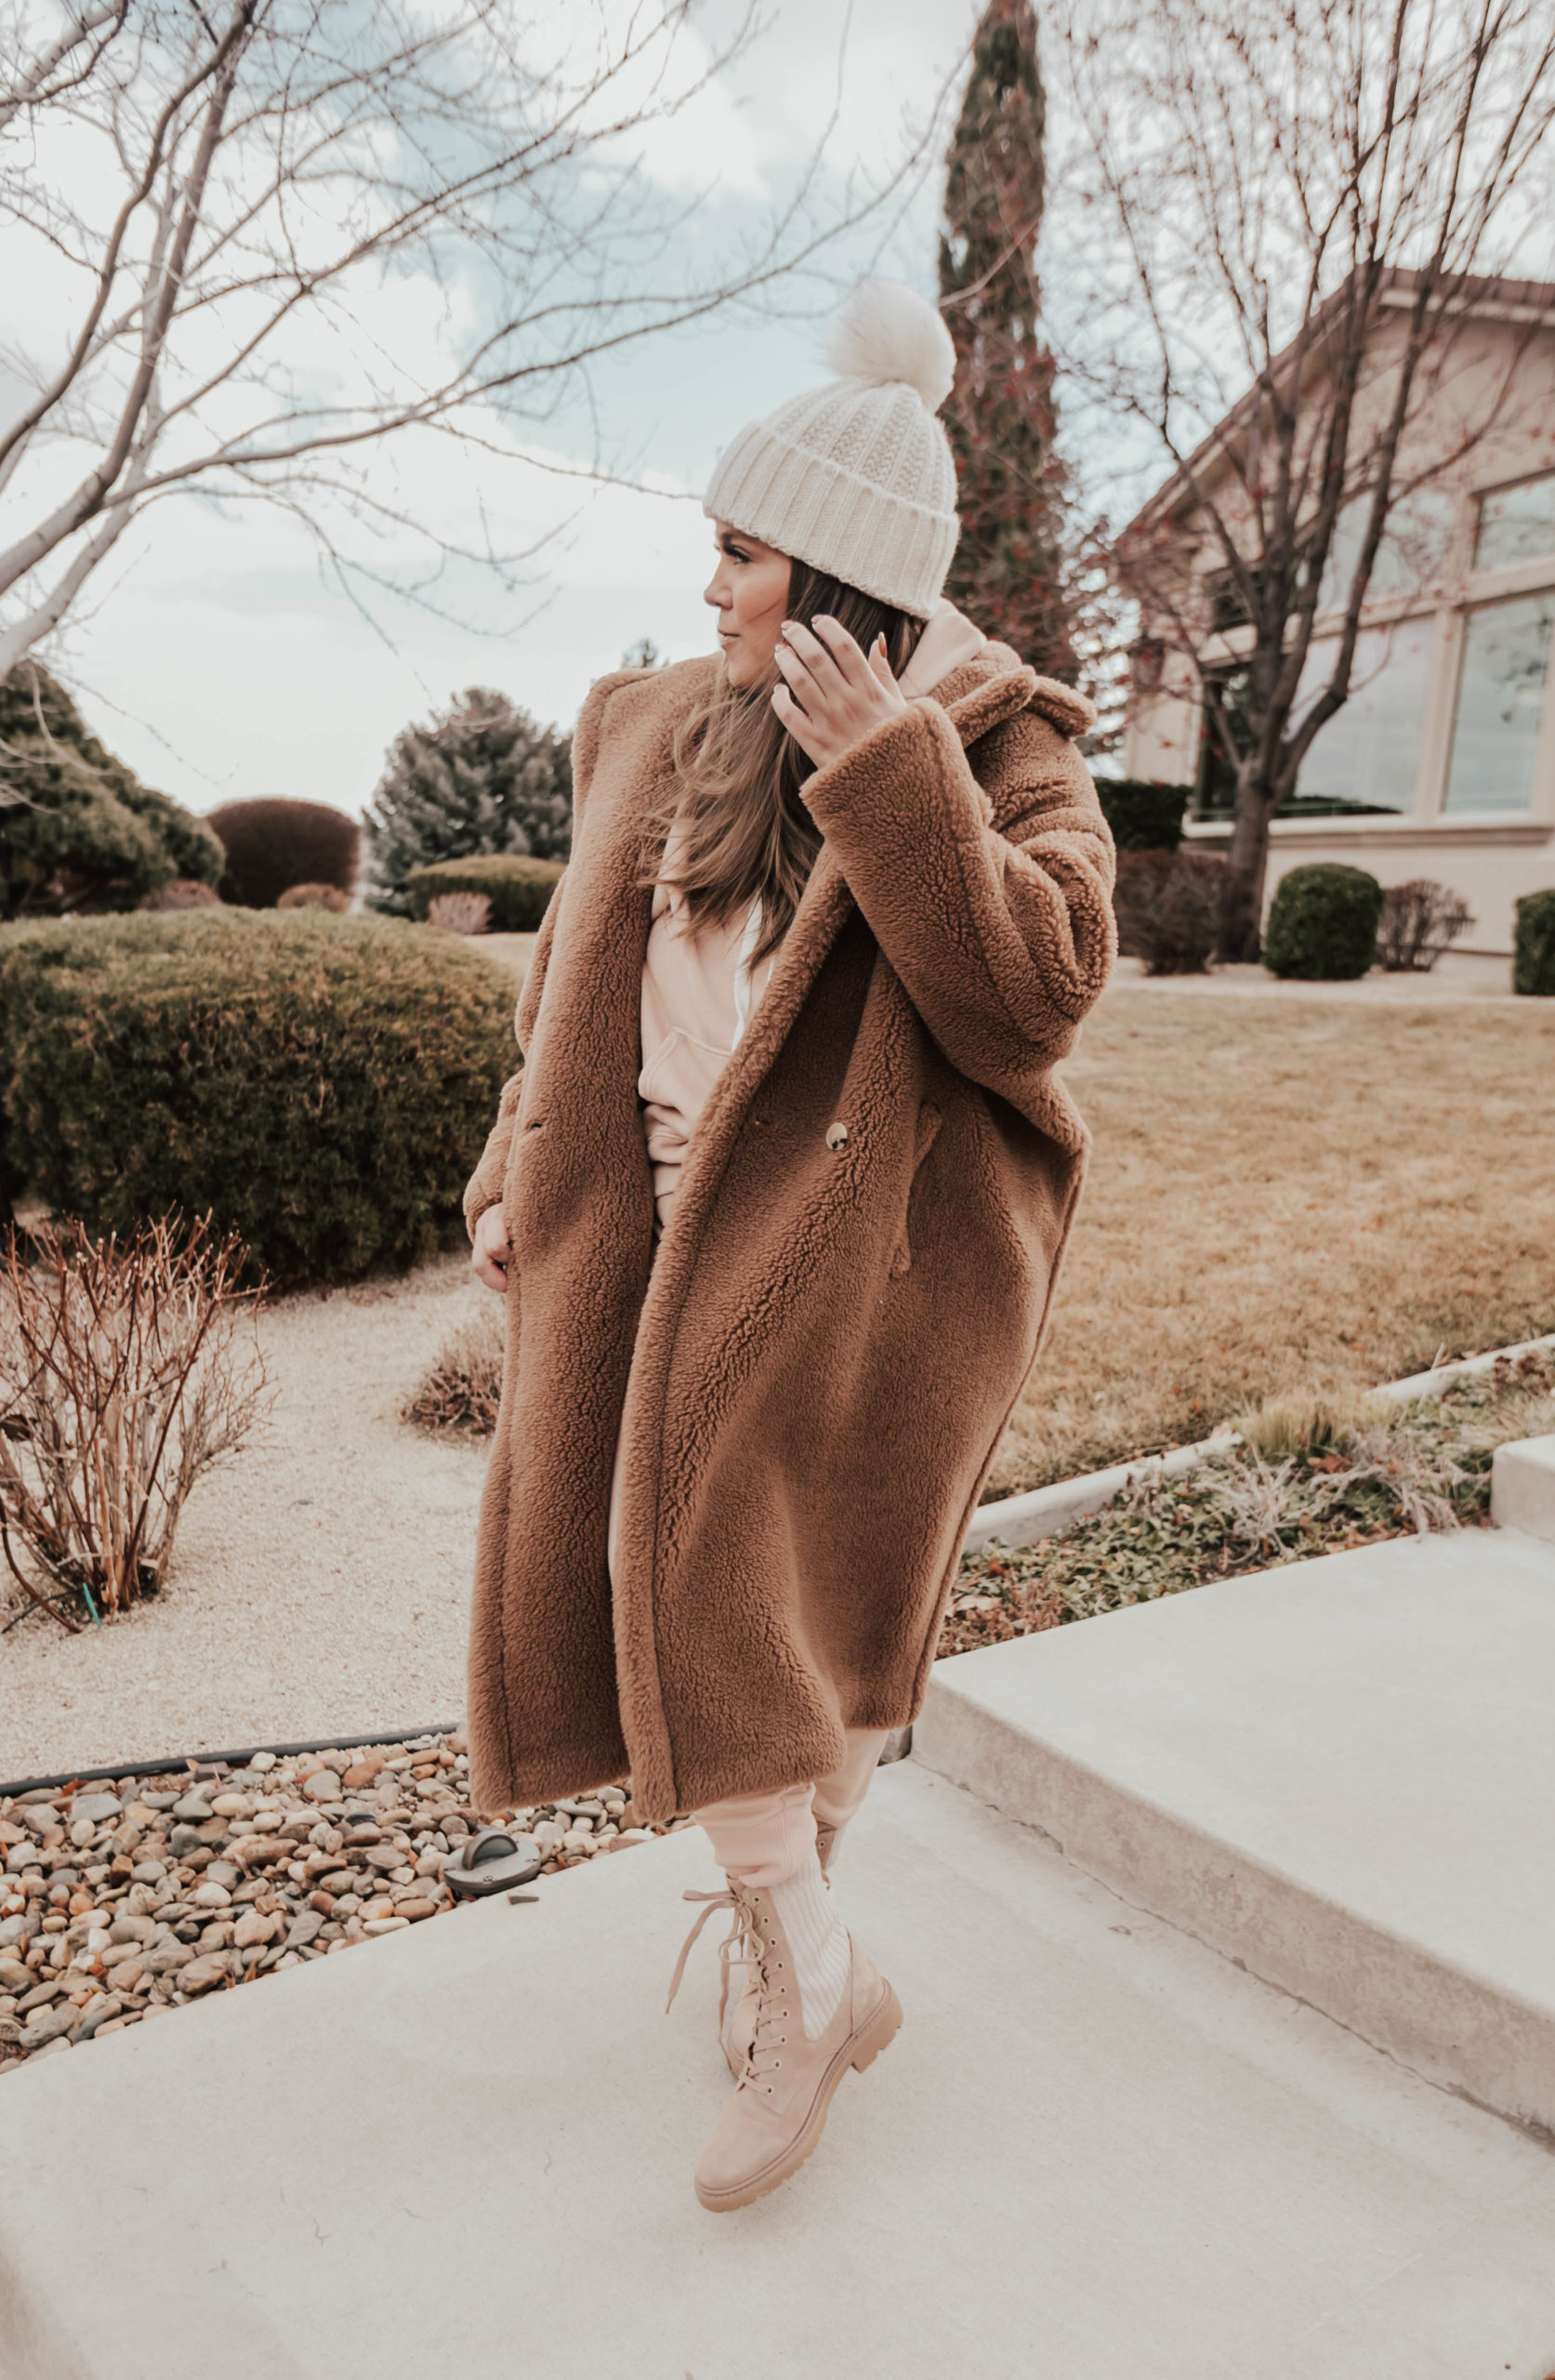 Reno blogger Ashley Zeal Hurd from The Ashley and Emily blog shares her favorite loungewear sets! Sweats aren't going anywhere in 2021!